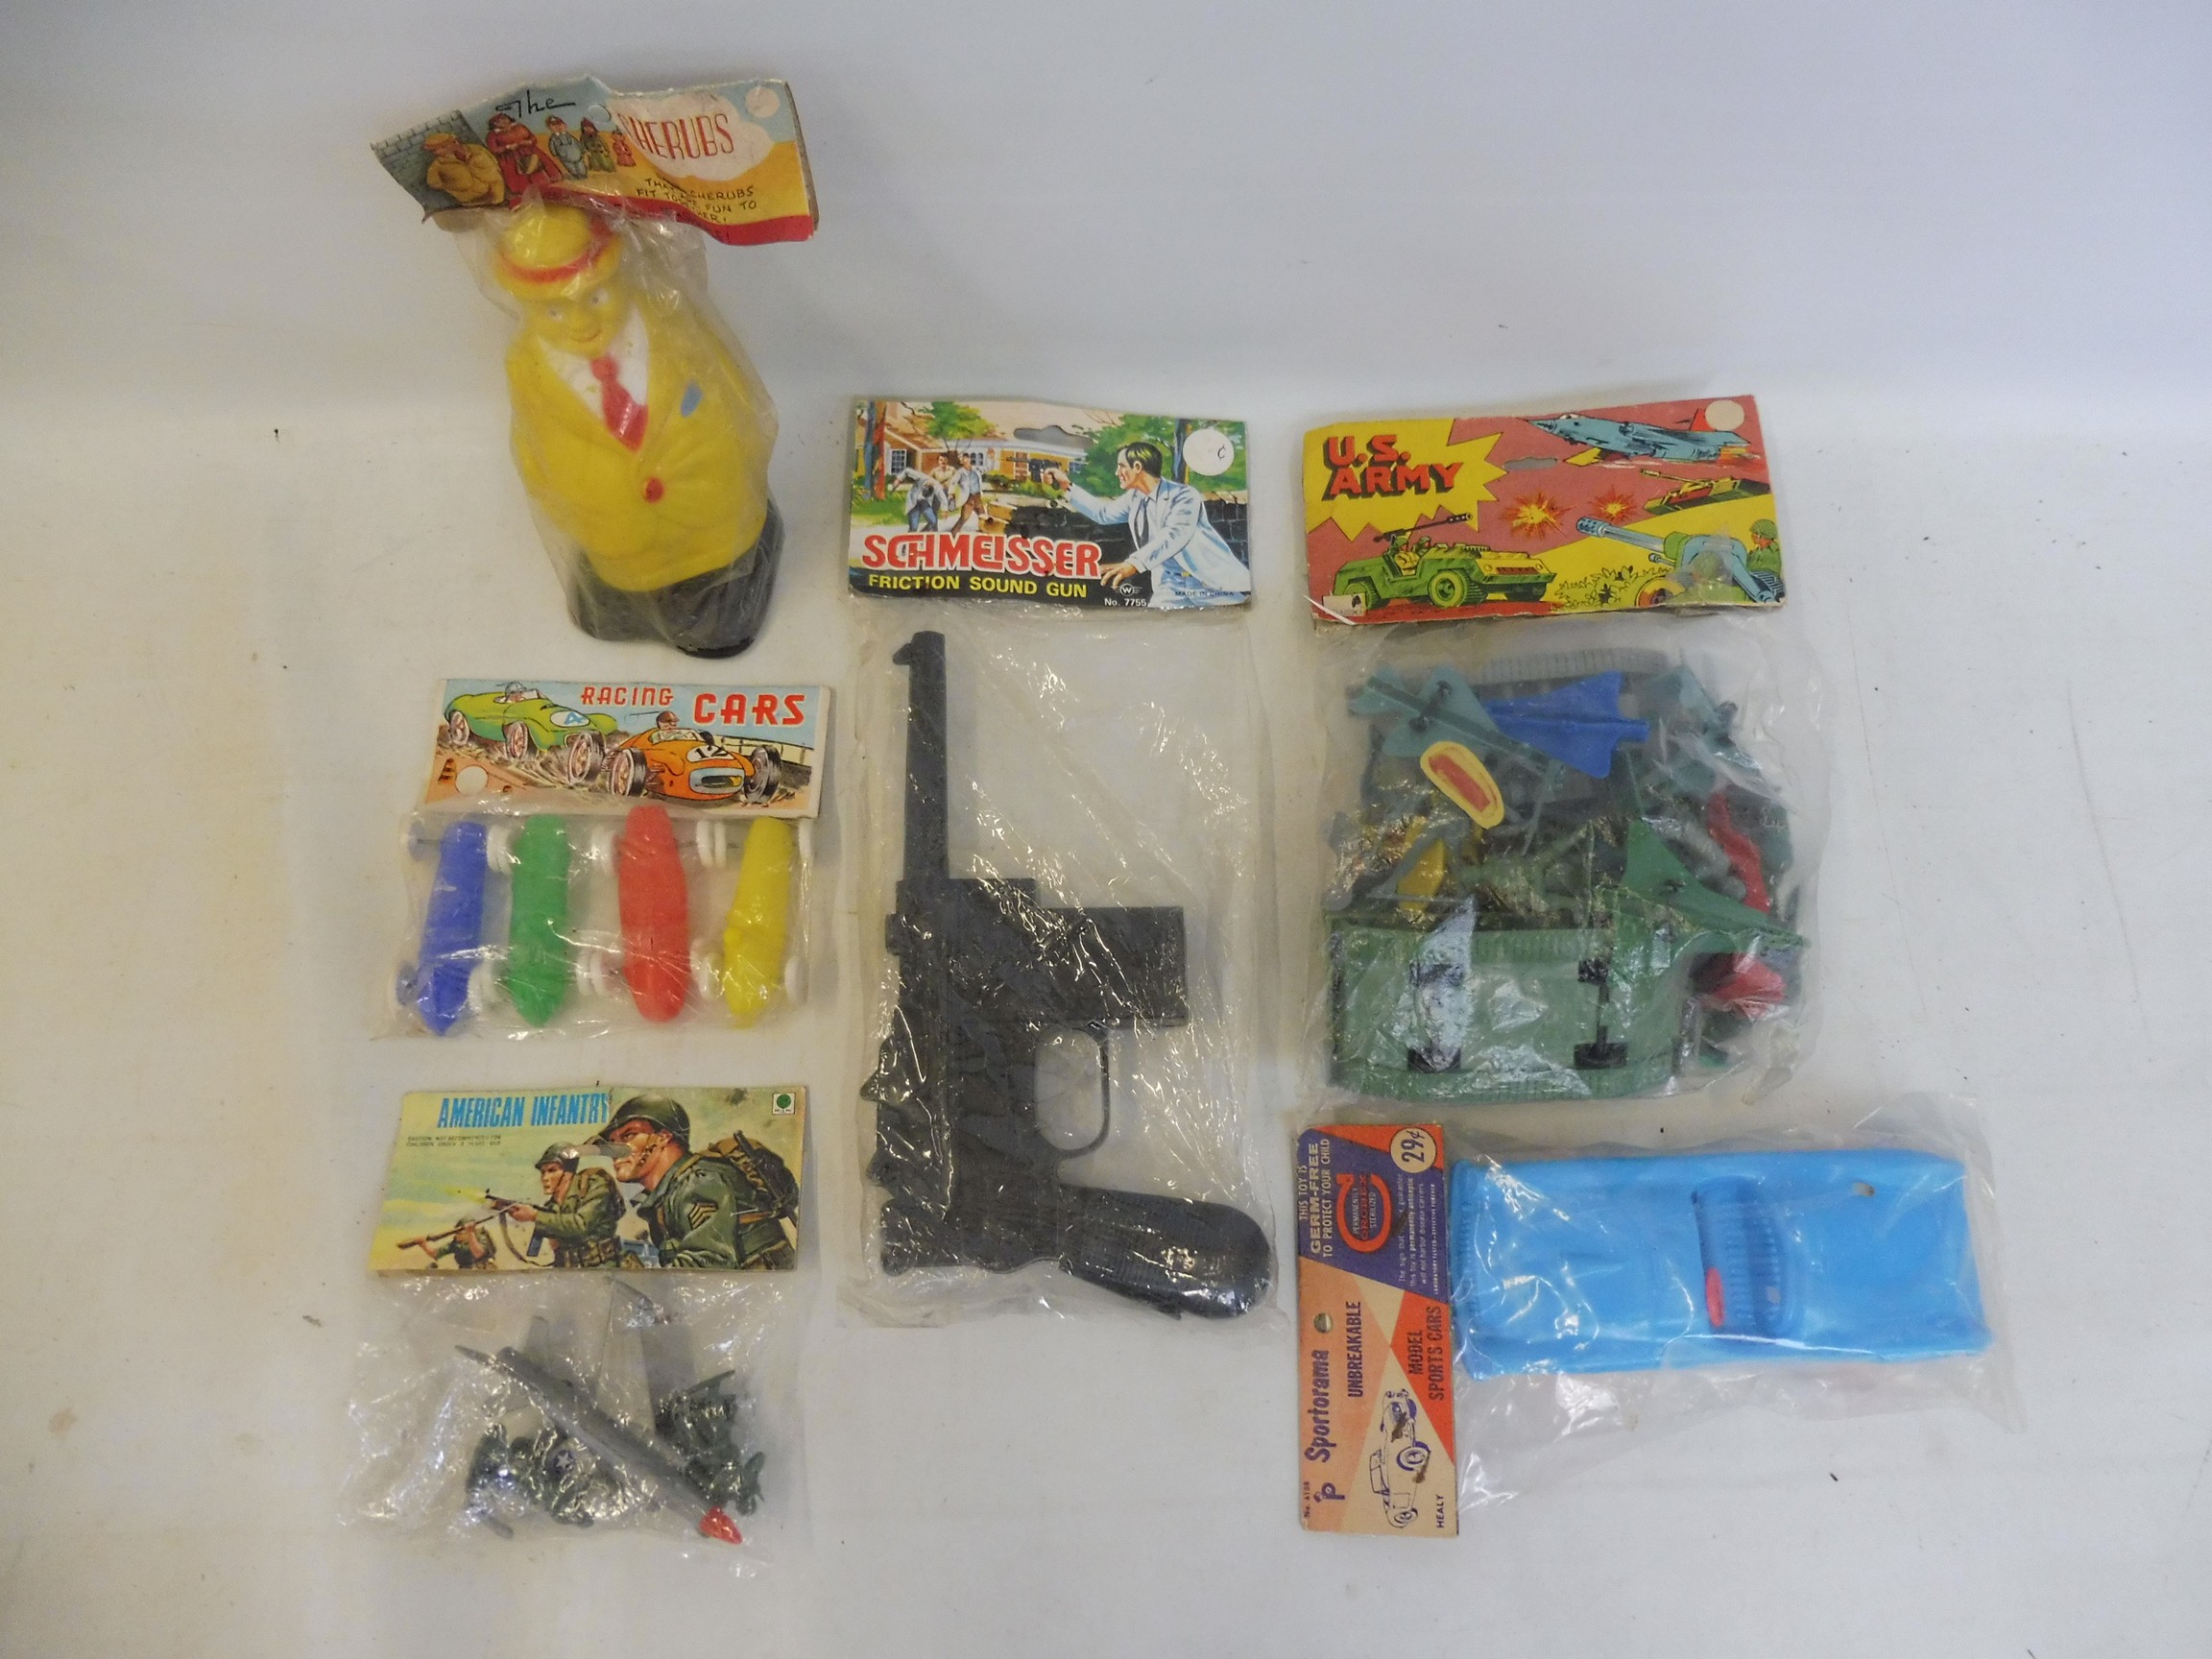 A mixed box of early plastics all sealed in original packs, including a Schmeisser sound gun.